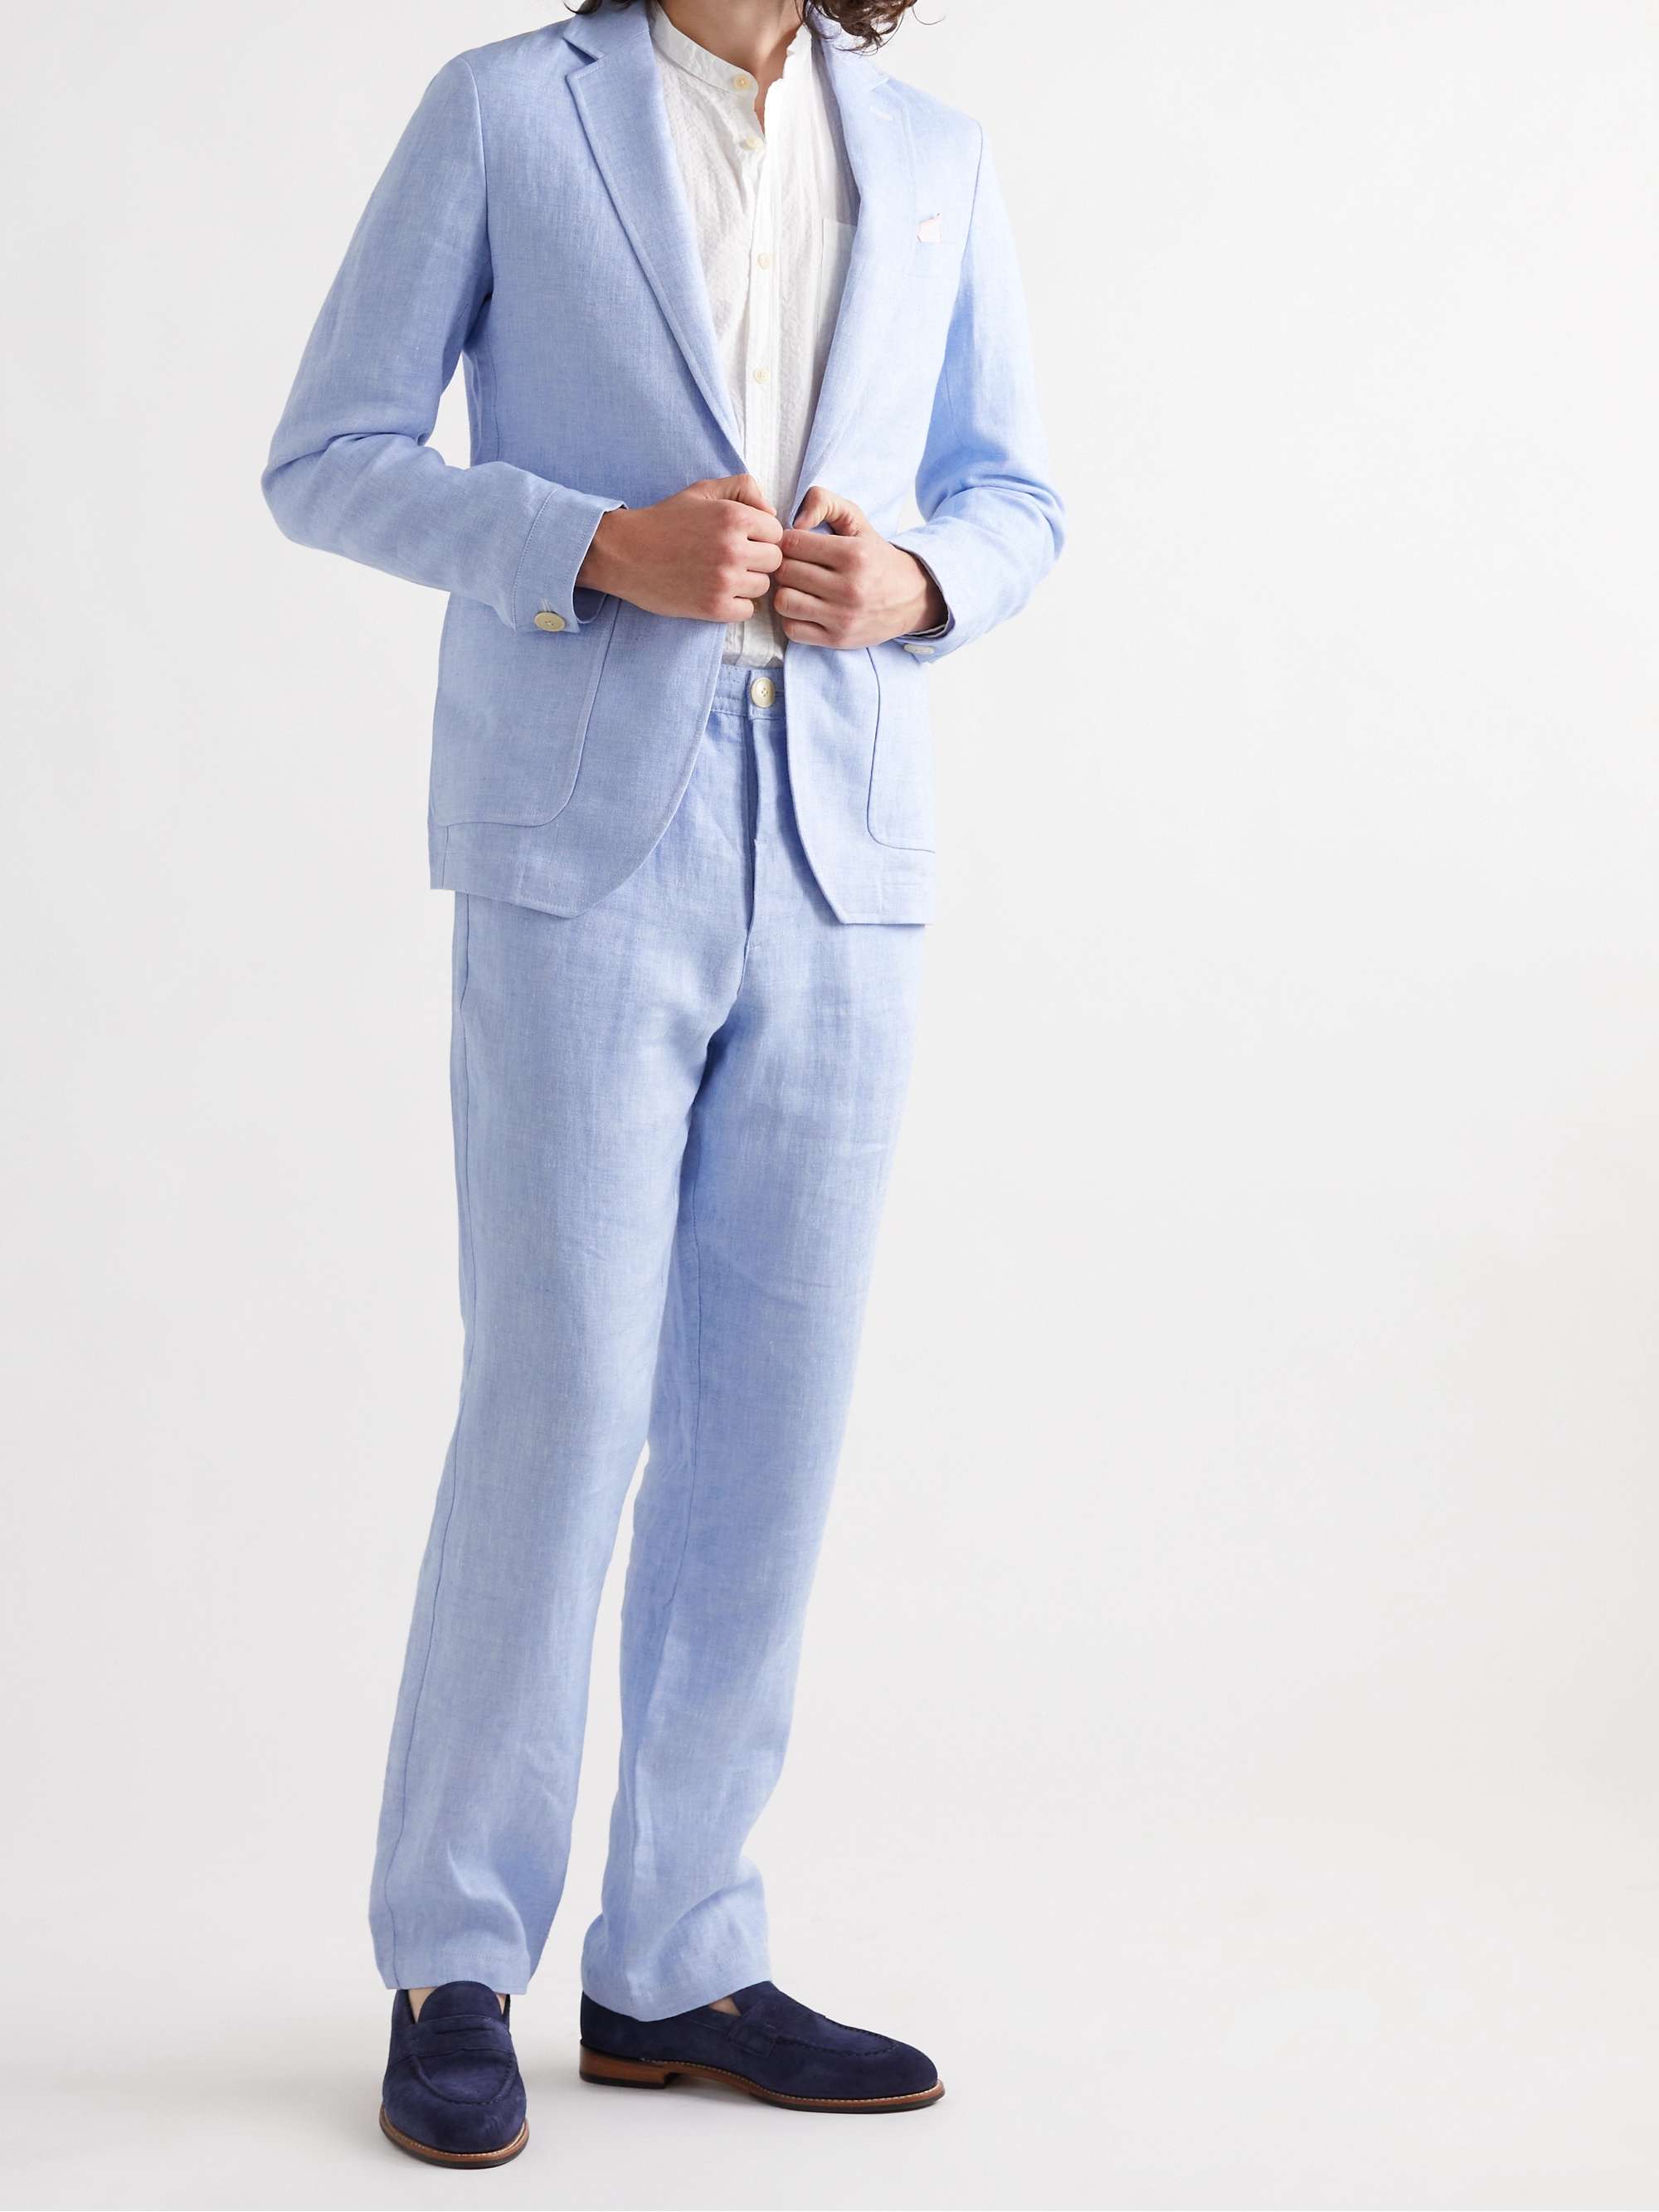 OLIVER SPENCER Linen Suit Trousers